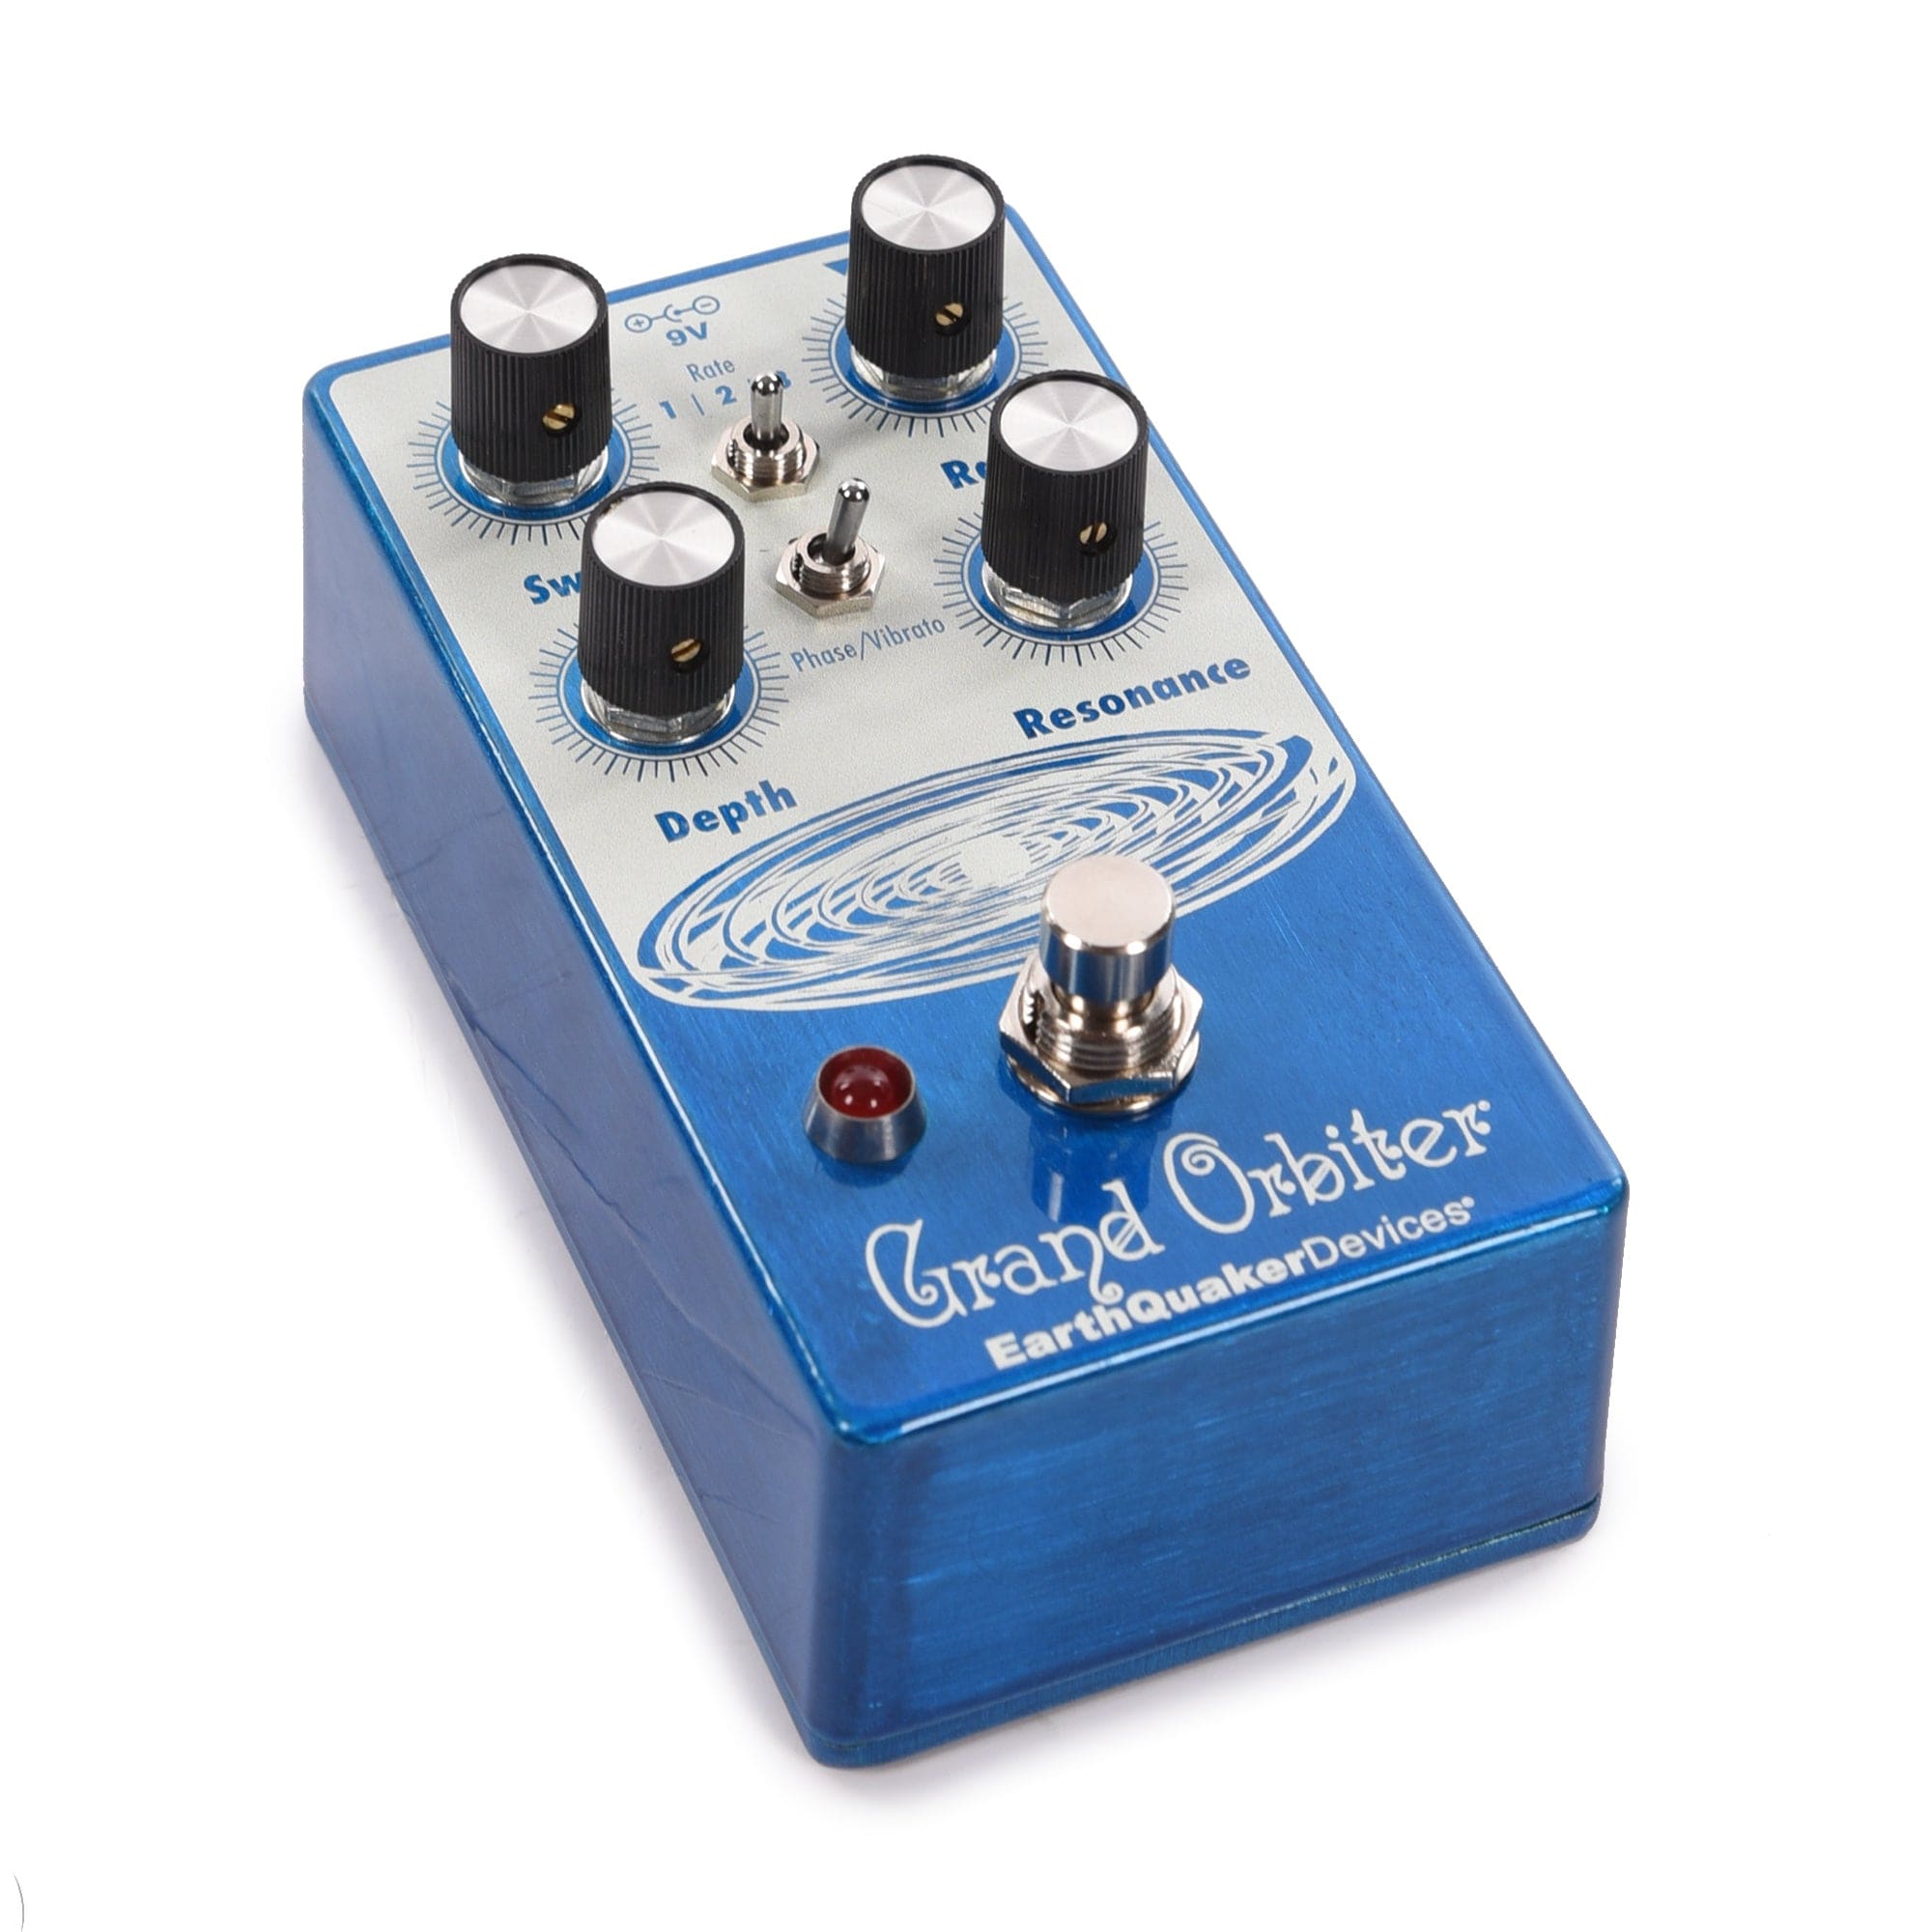 Earthquaker Devices Grand Orbiter V3 Phase Machine Pedal Transparent Blue Effects and Pedals / Phase Shifters